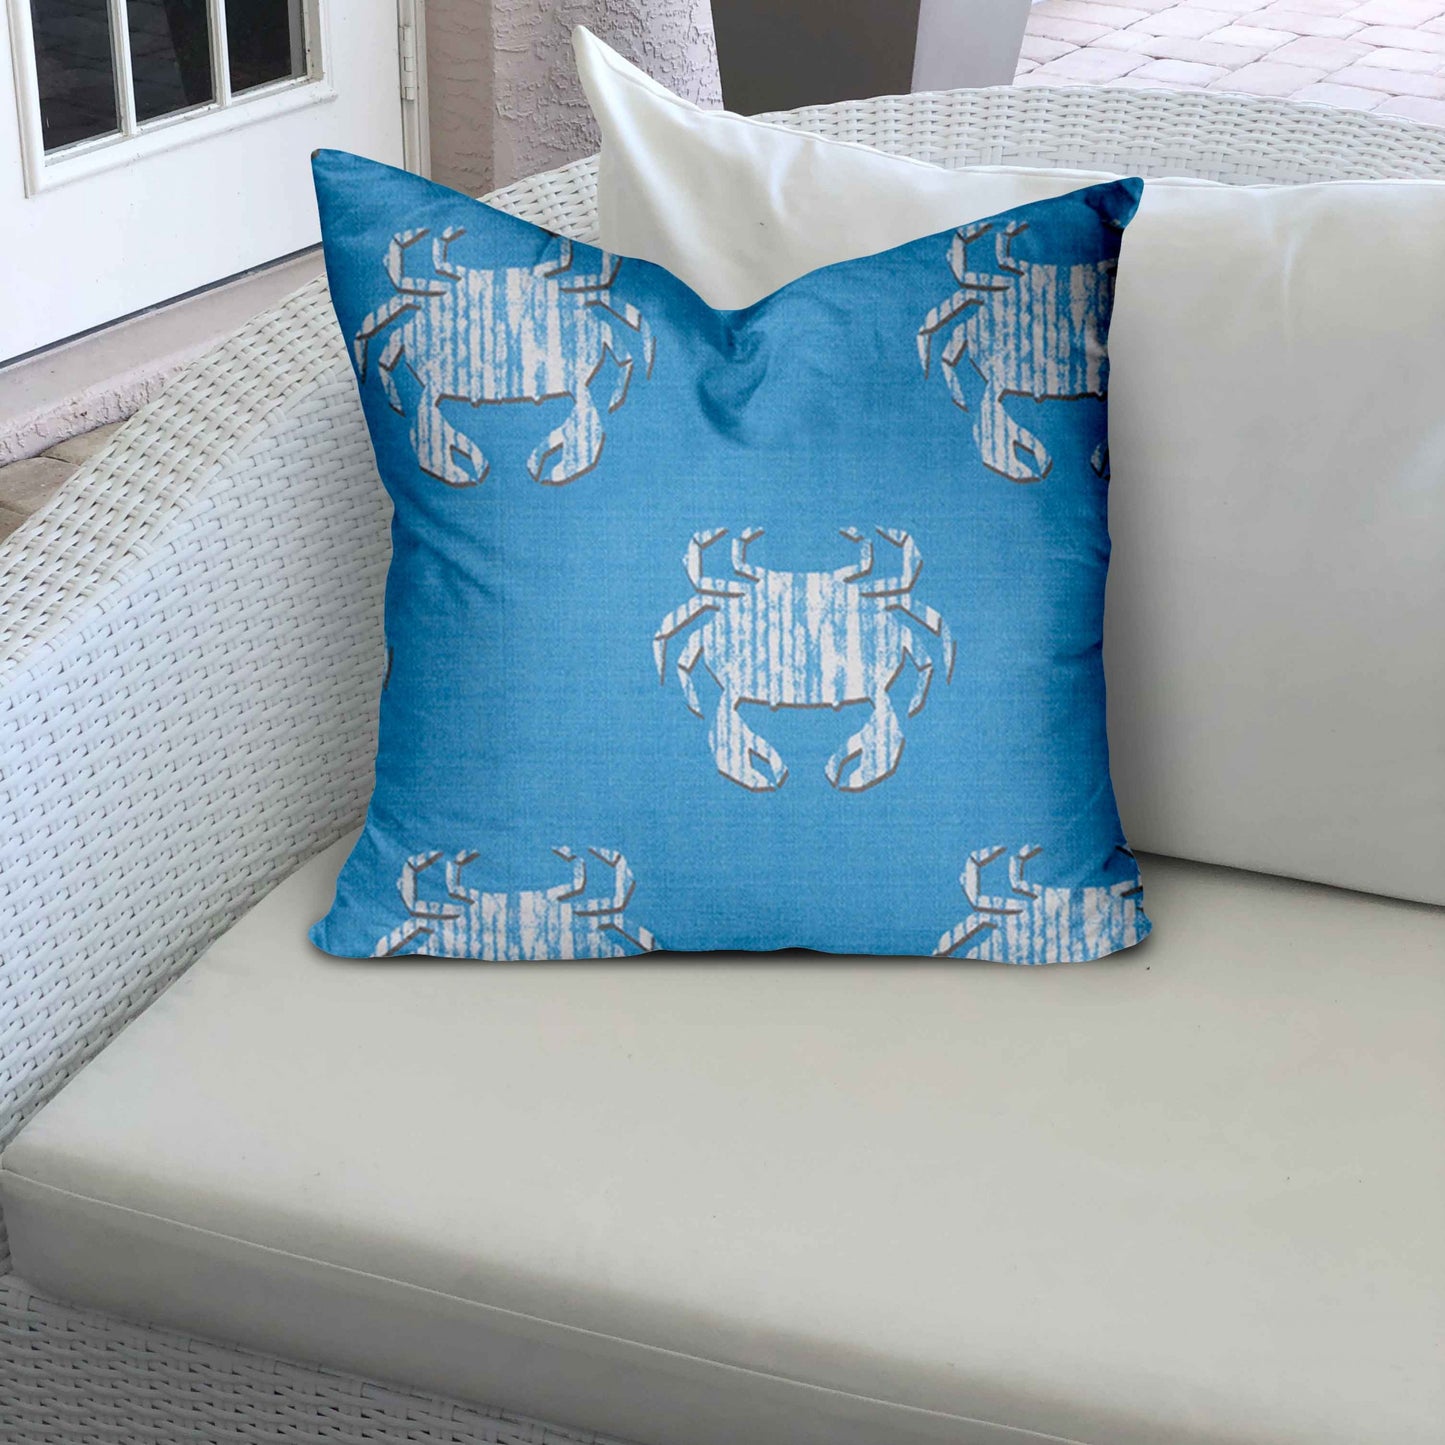 26" X 26" Blue And White Crab Enveloped Coastal Throw Indoor Outdoor Pillow Cover